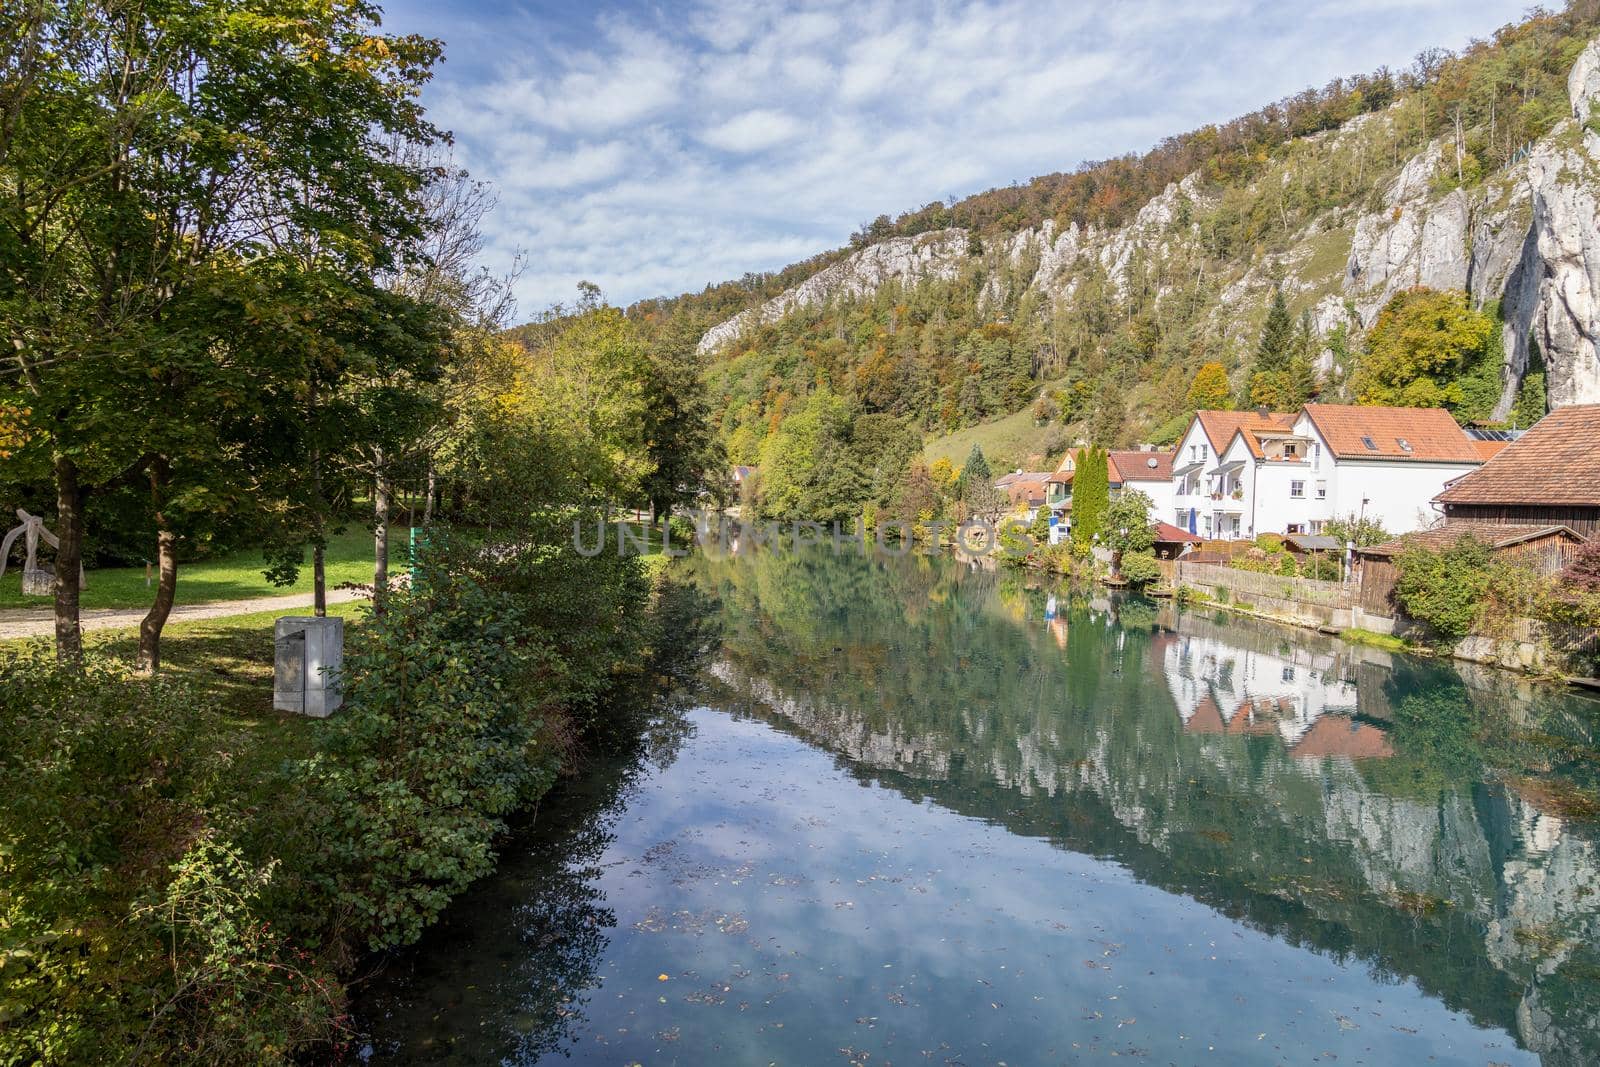 Idyllic view at the village Markt Essing in Bavaria, Germany with the Altmuehl river and high rocks  by reinerc